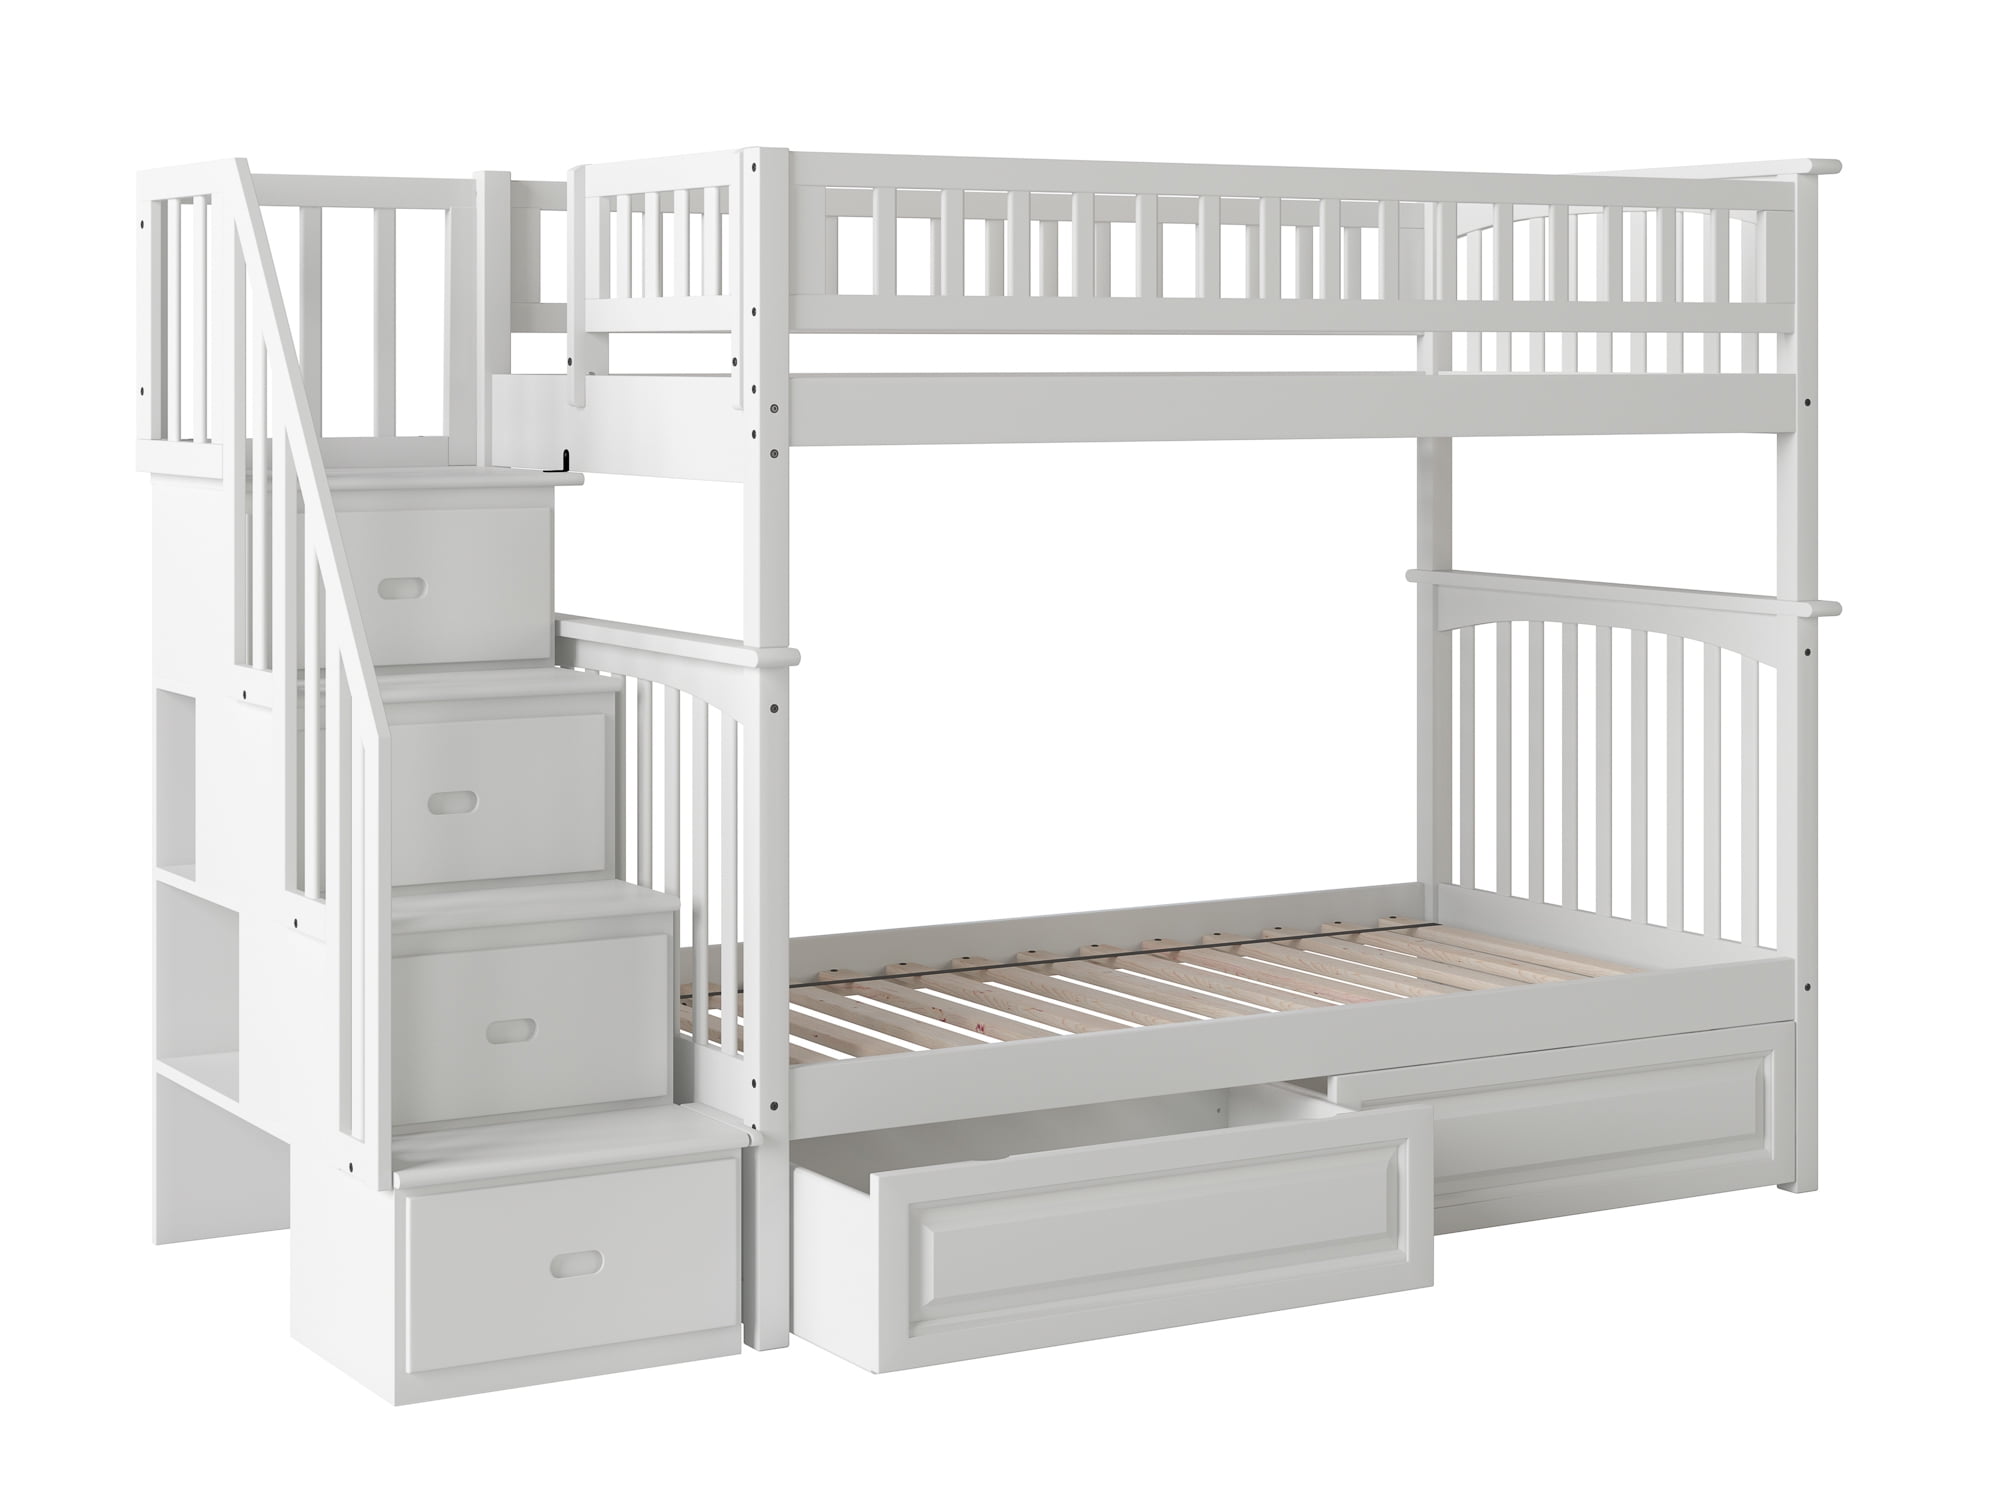 Picture of Atlantic Furniture AB55622 Columbia Staircase Bunkbed with Raised Panel Bed Drawers, Twin Over Twin Size - White